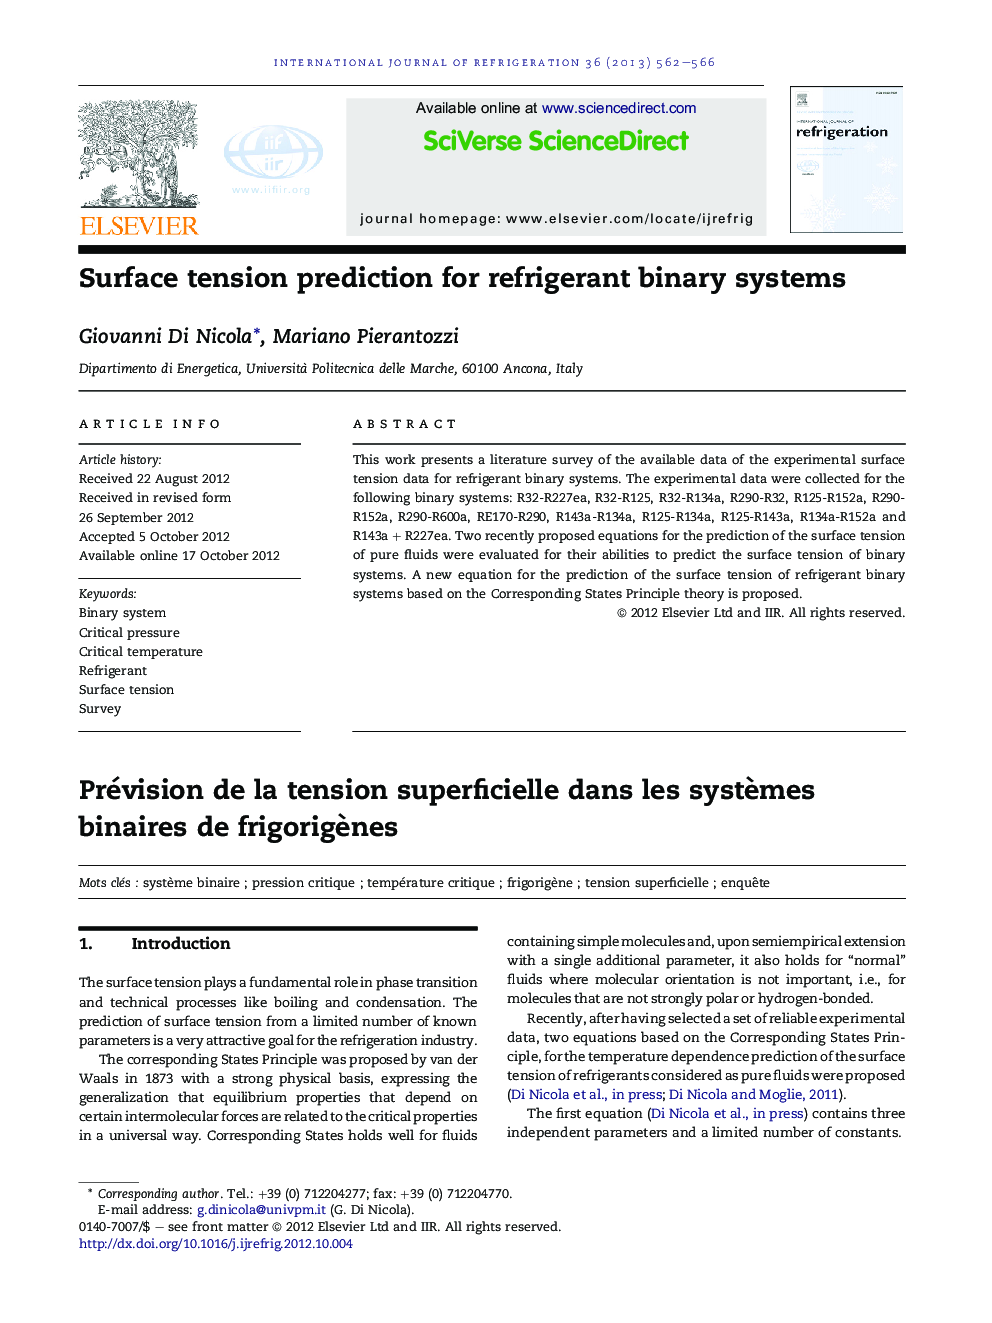 Surface tension prediction for refrigerant binary systems